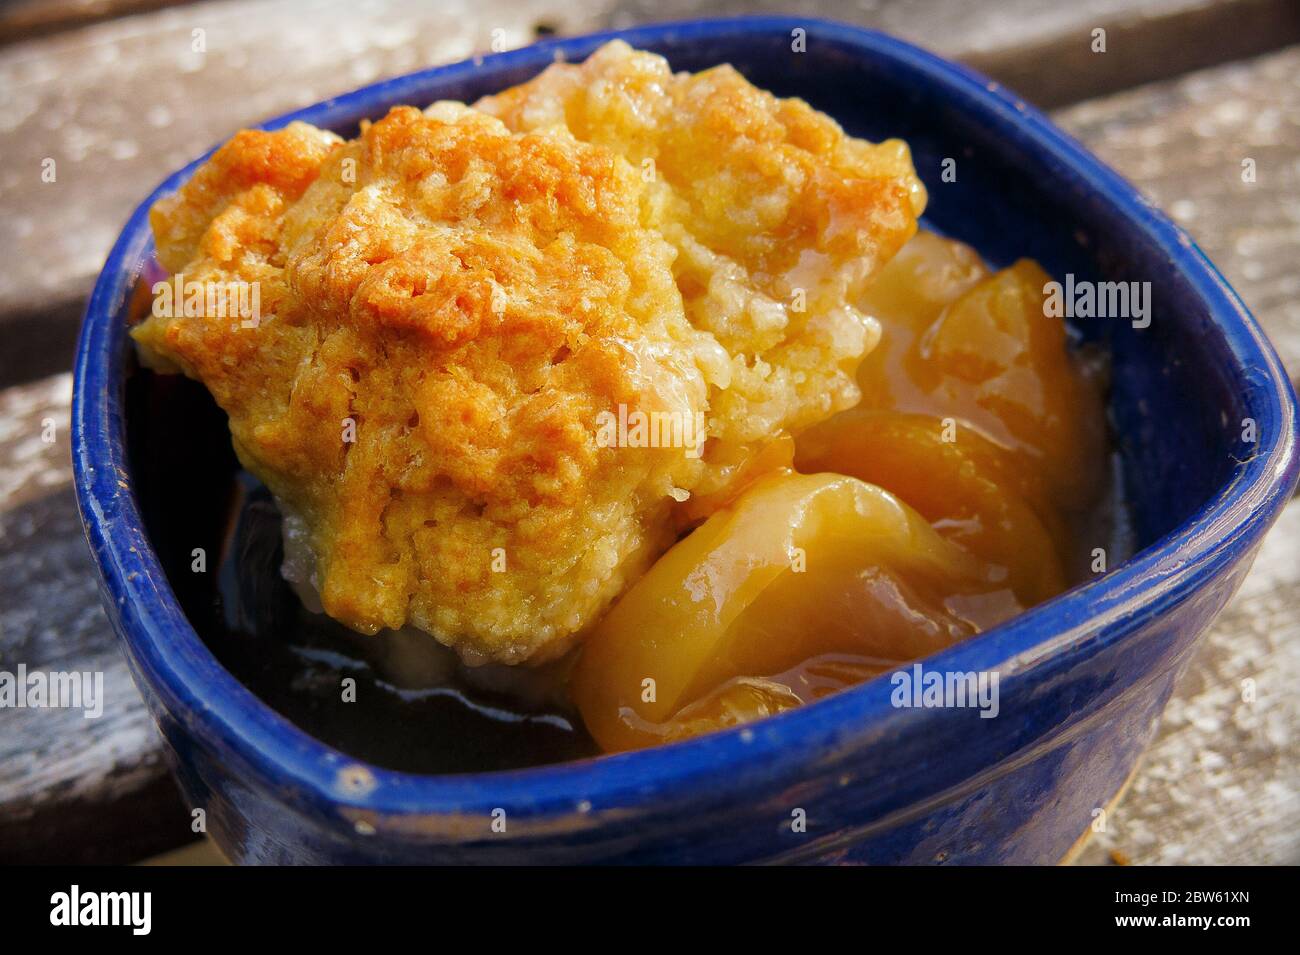 Close Up of Peach and Biscuit Dessert in Blue Bowl Stock Photo